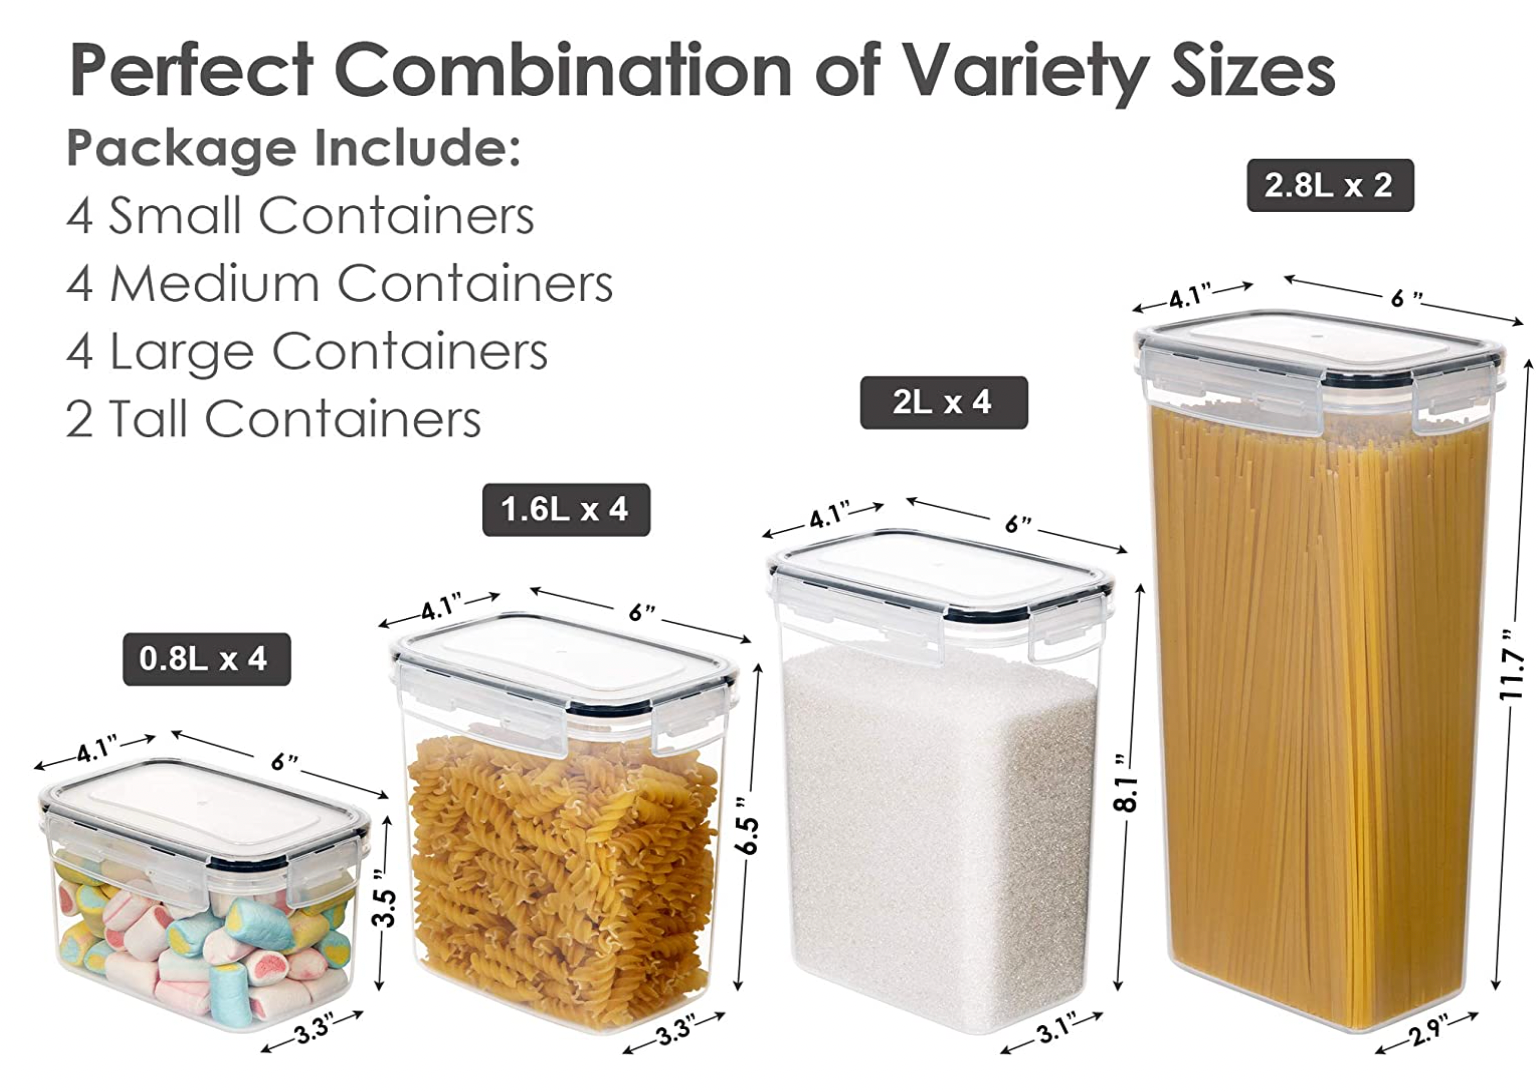 How Many Food Storage Containers Do I Need?